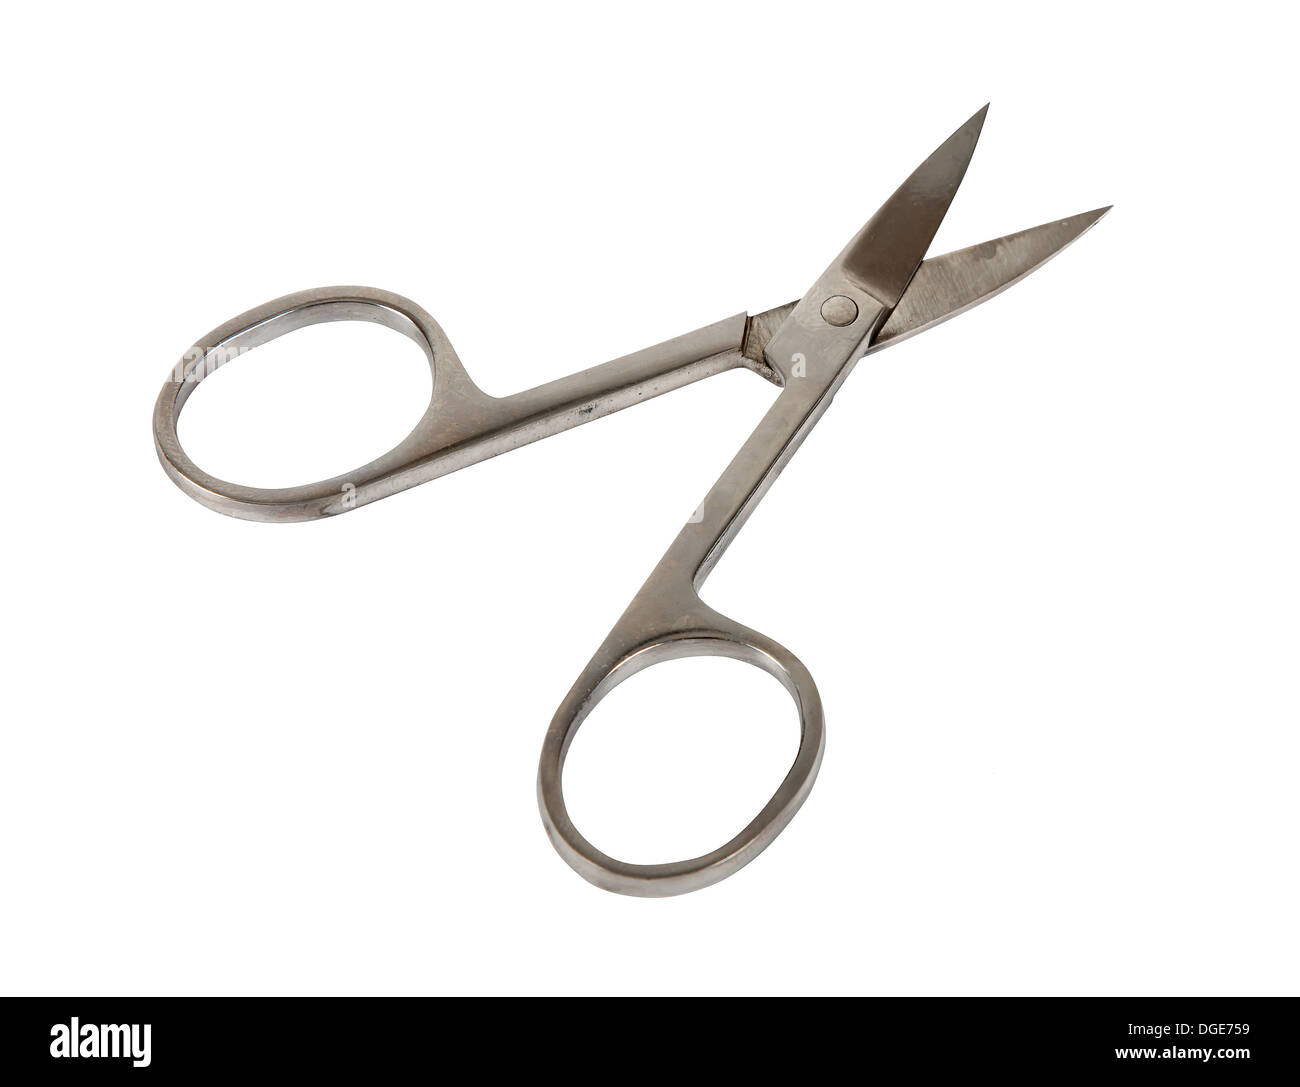 opened small manicure scissors isolated on white background Stock Photo